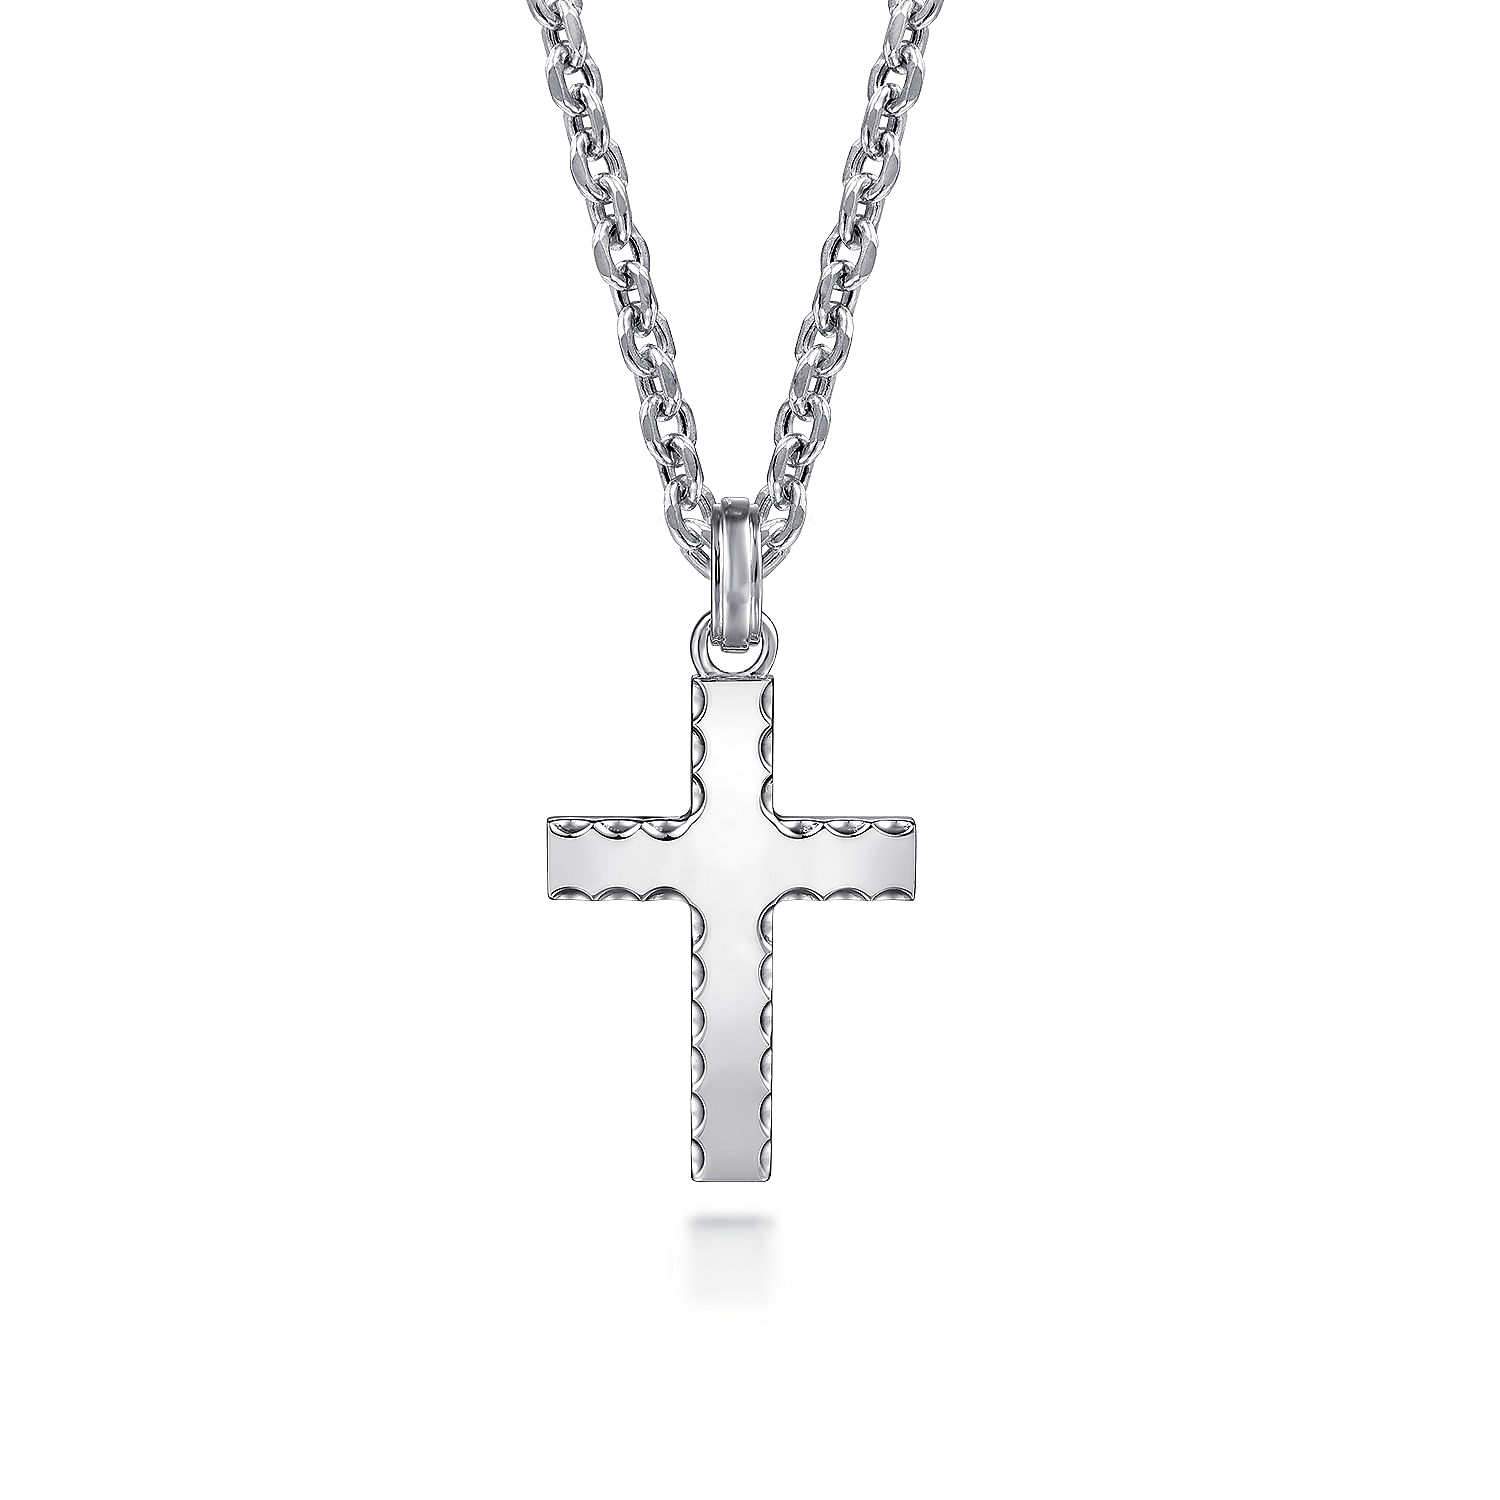 22 Inch 925 Sterling Silver Cross Link Chain Necklace with Beveled Trim